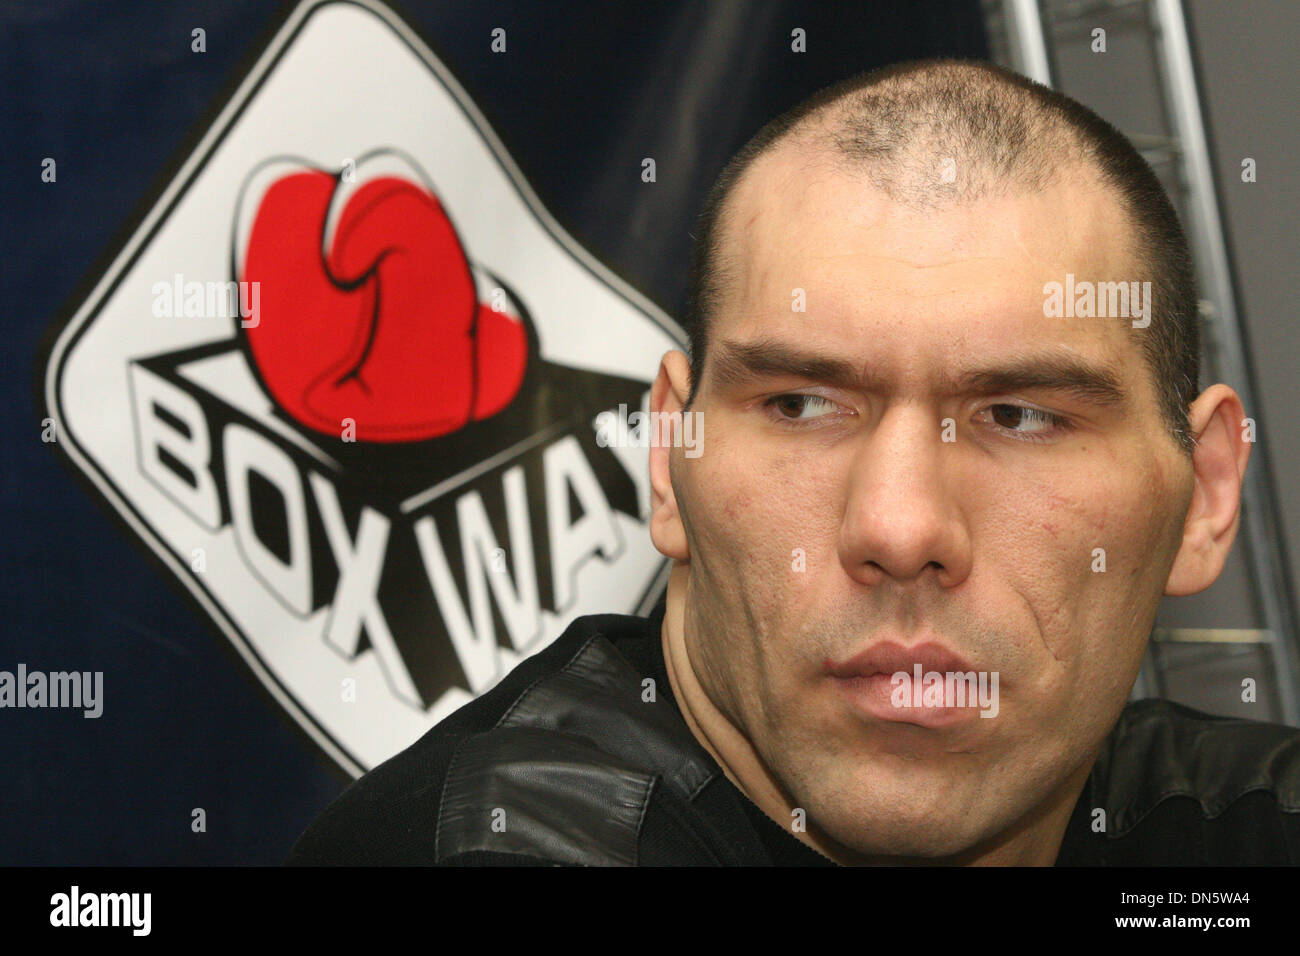 Nikolai Valuev - WBA superheavy weight boxing champion at the press conference in St.Petersburg-Russia. December 22, 2005(Credit Image: © PhotoXpress/ZUMA Press) RESTRICTIONS: North and South America Rights ONLY! Stock Photo